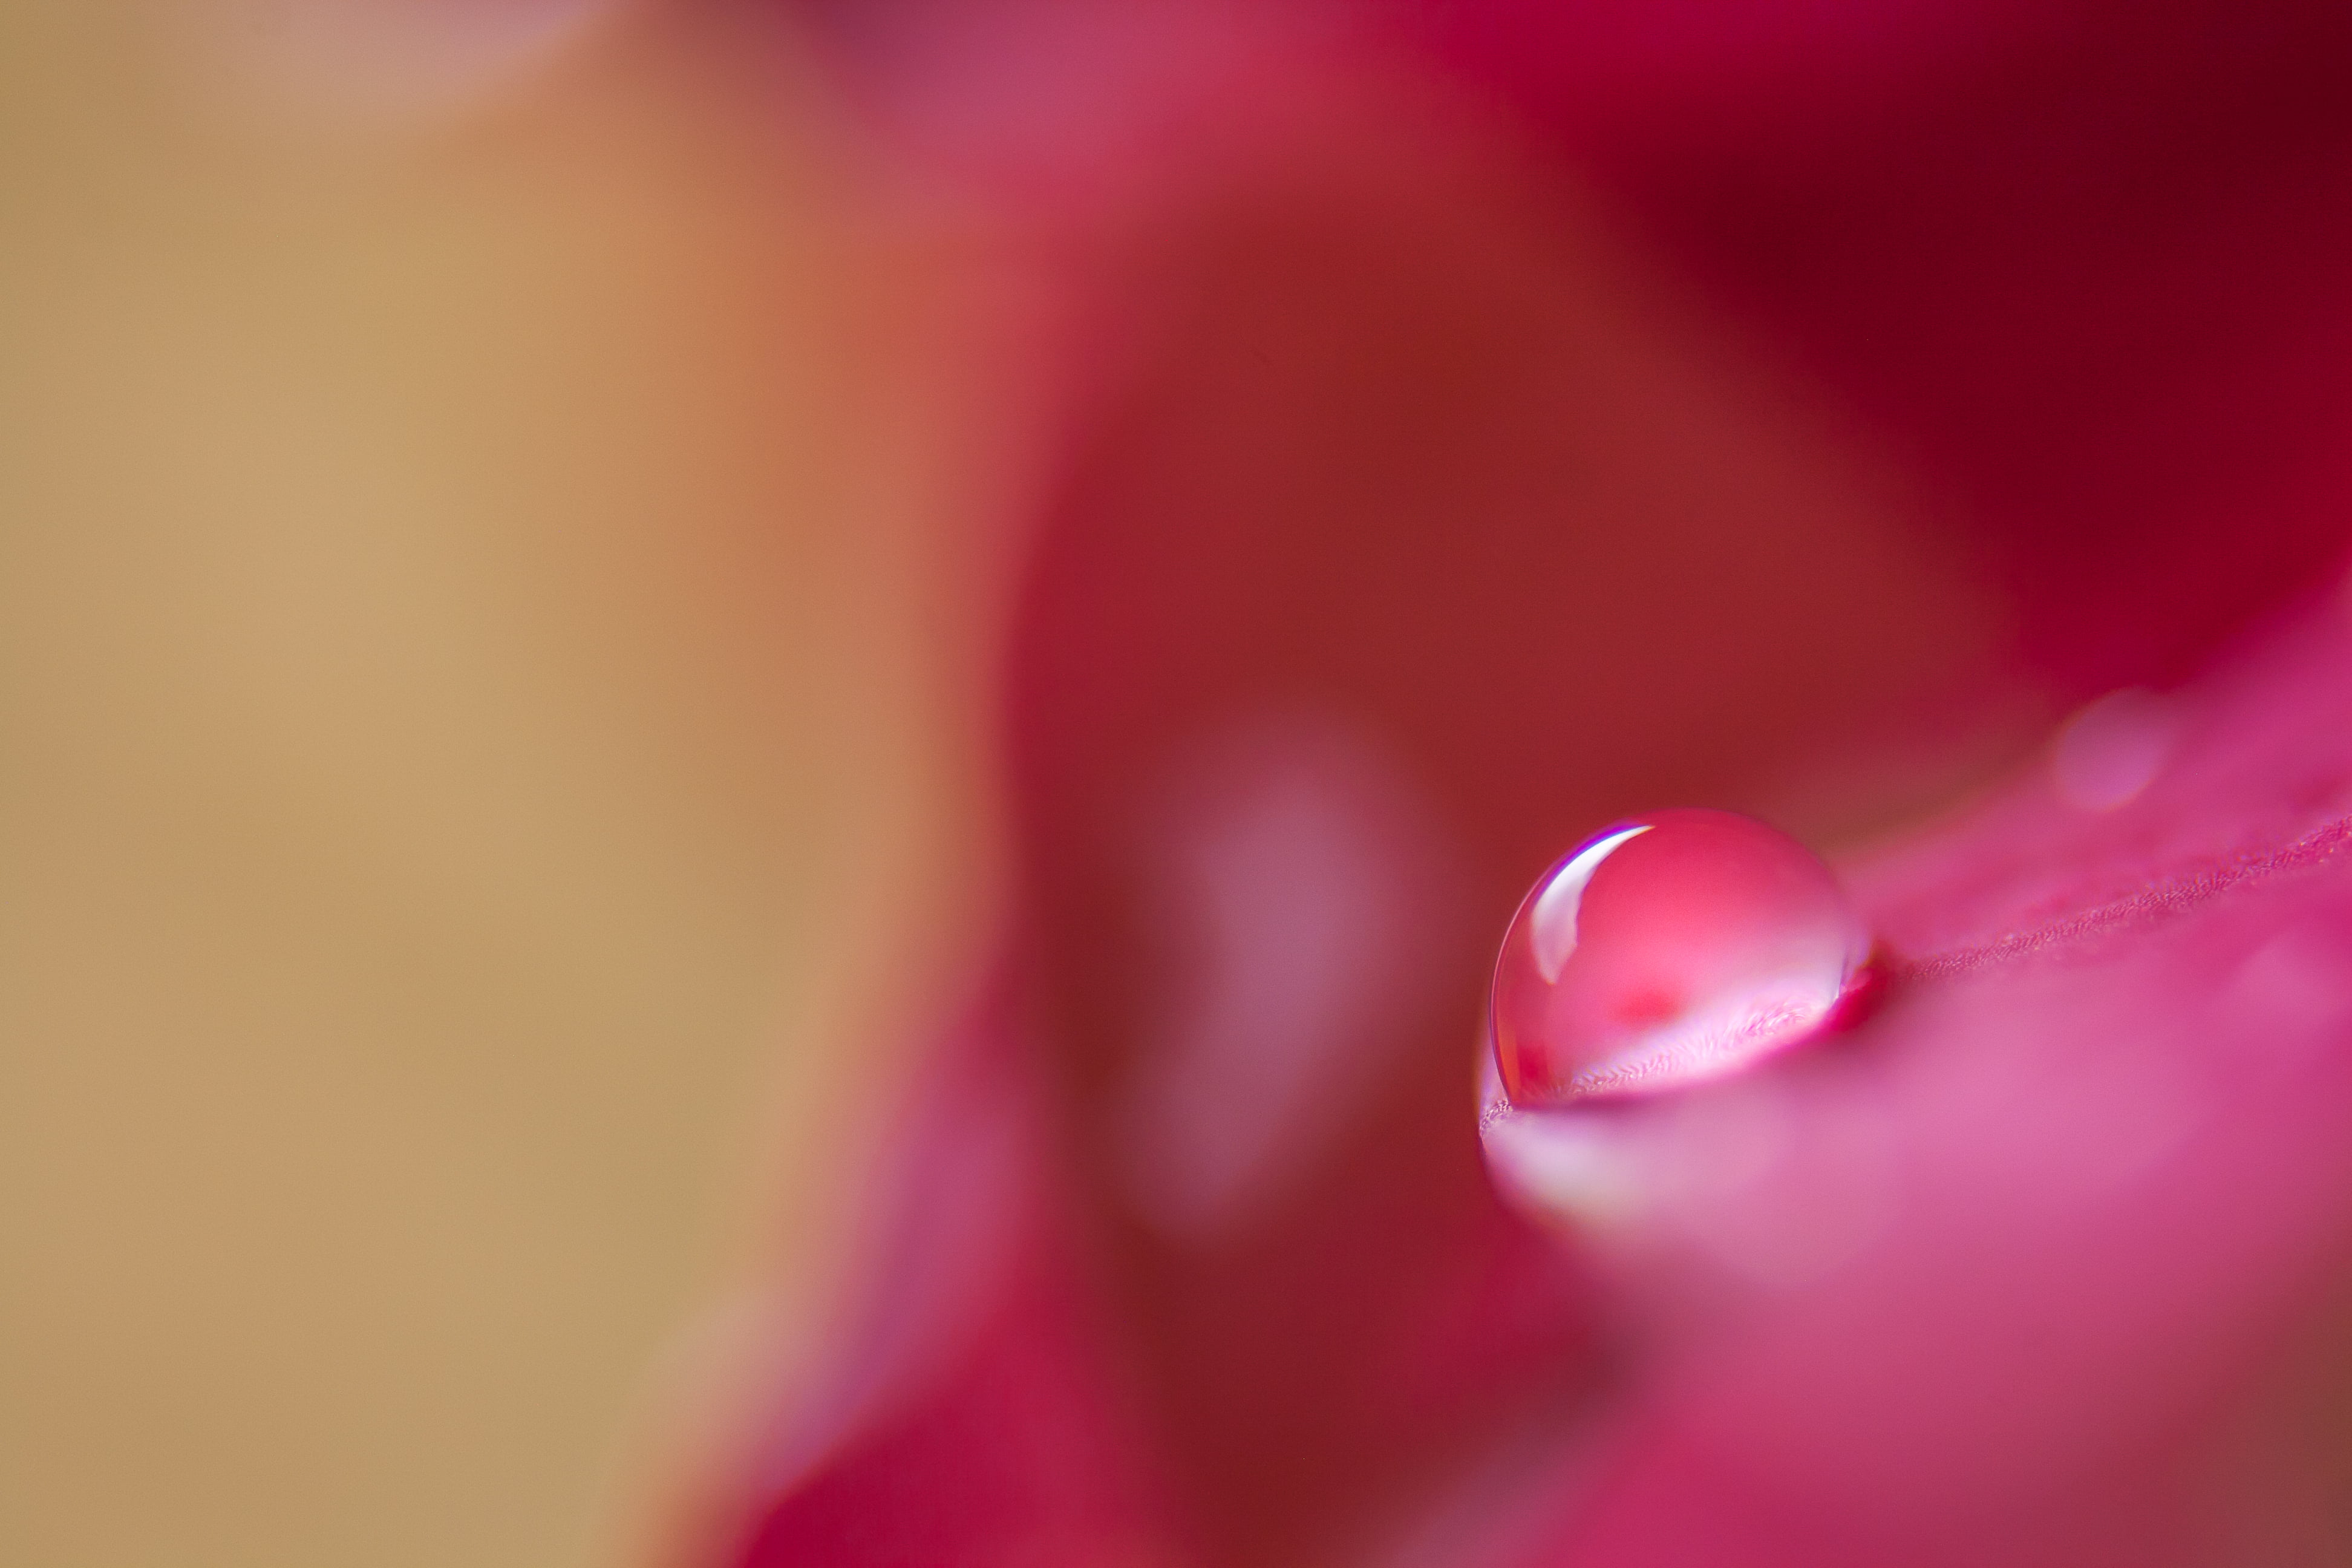 micro photography of dew drop on red petal flower, rose, rose